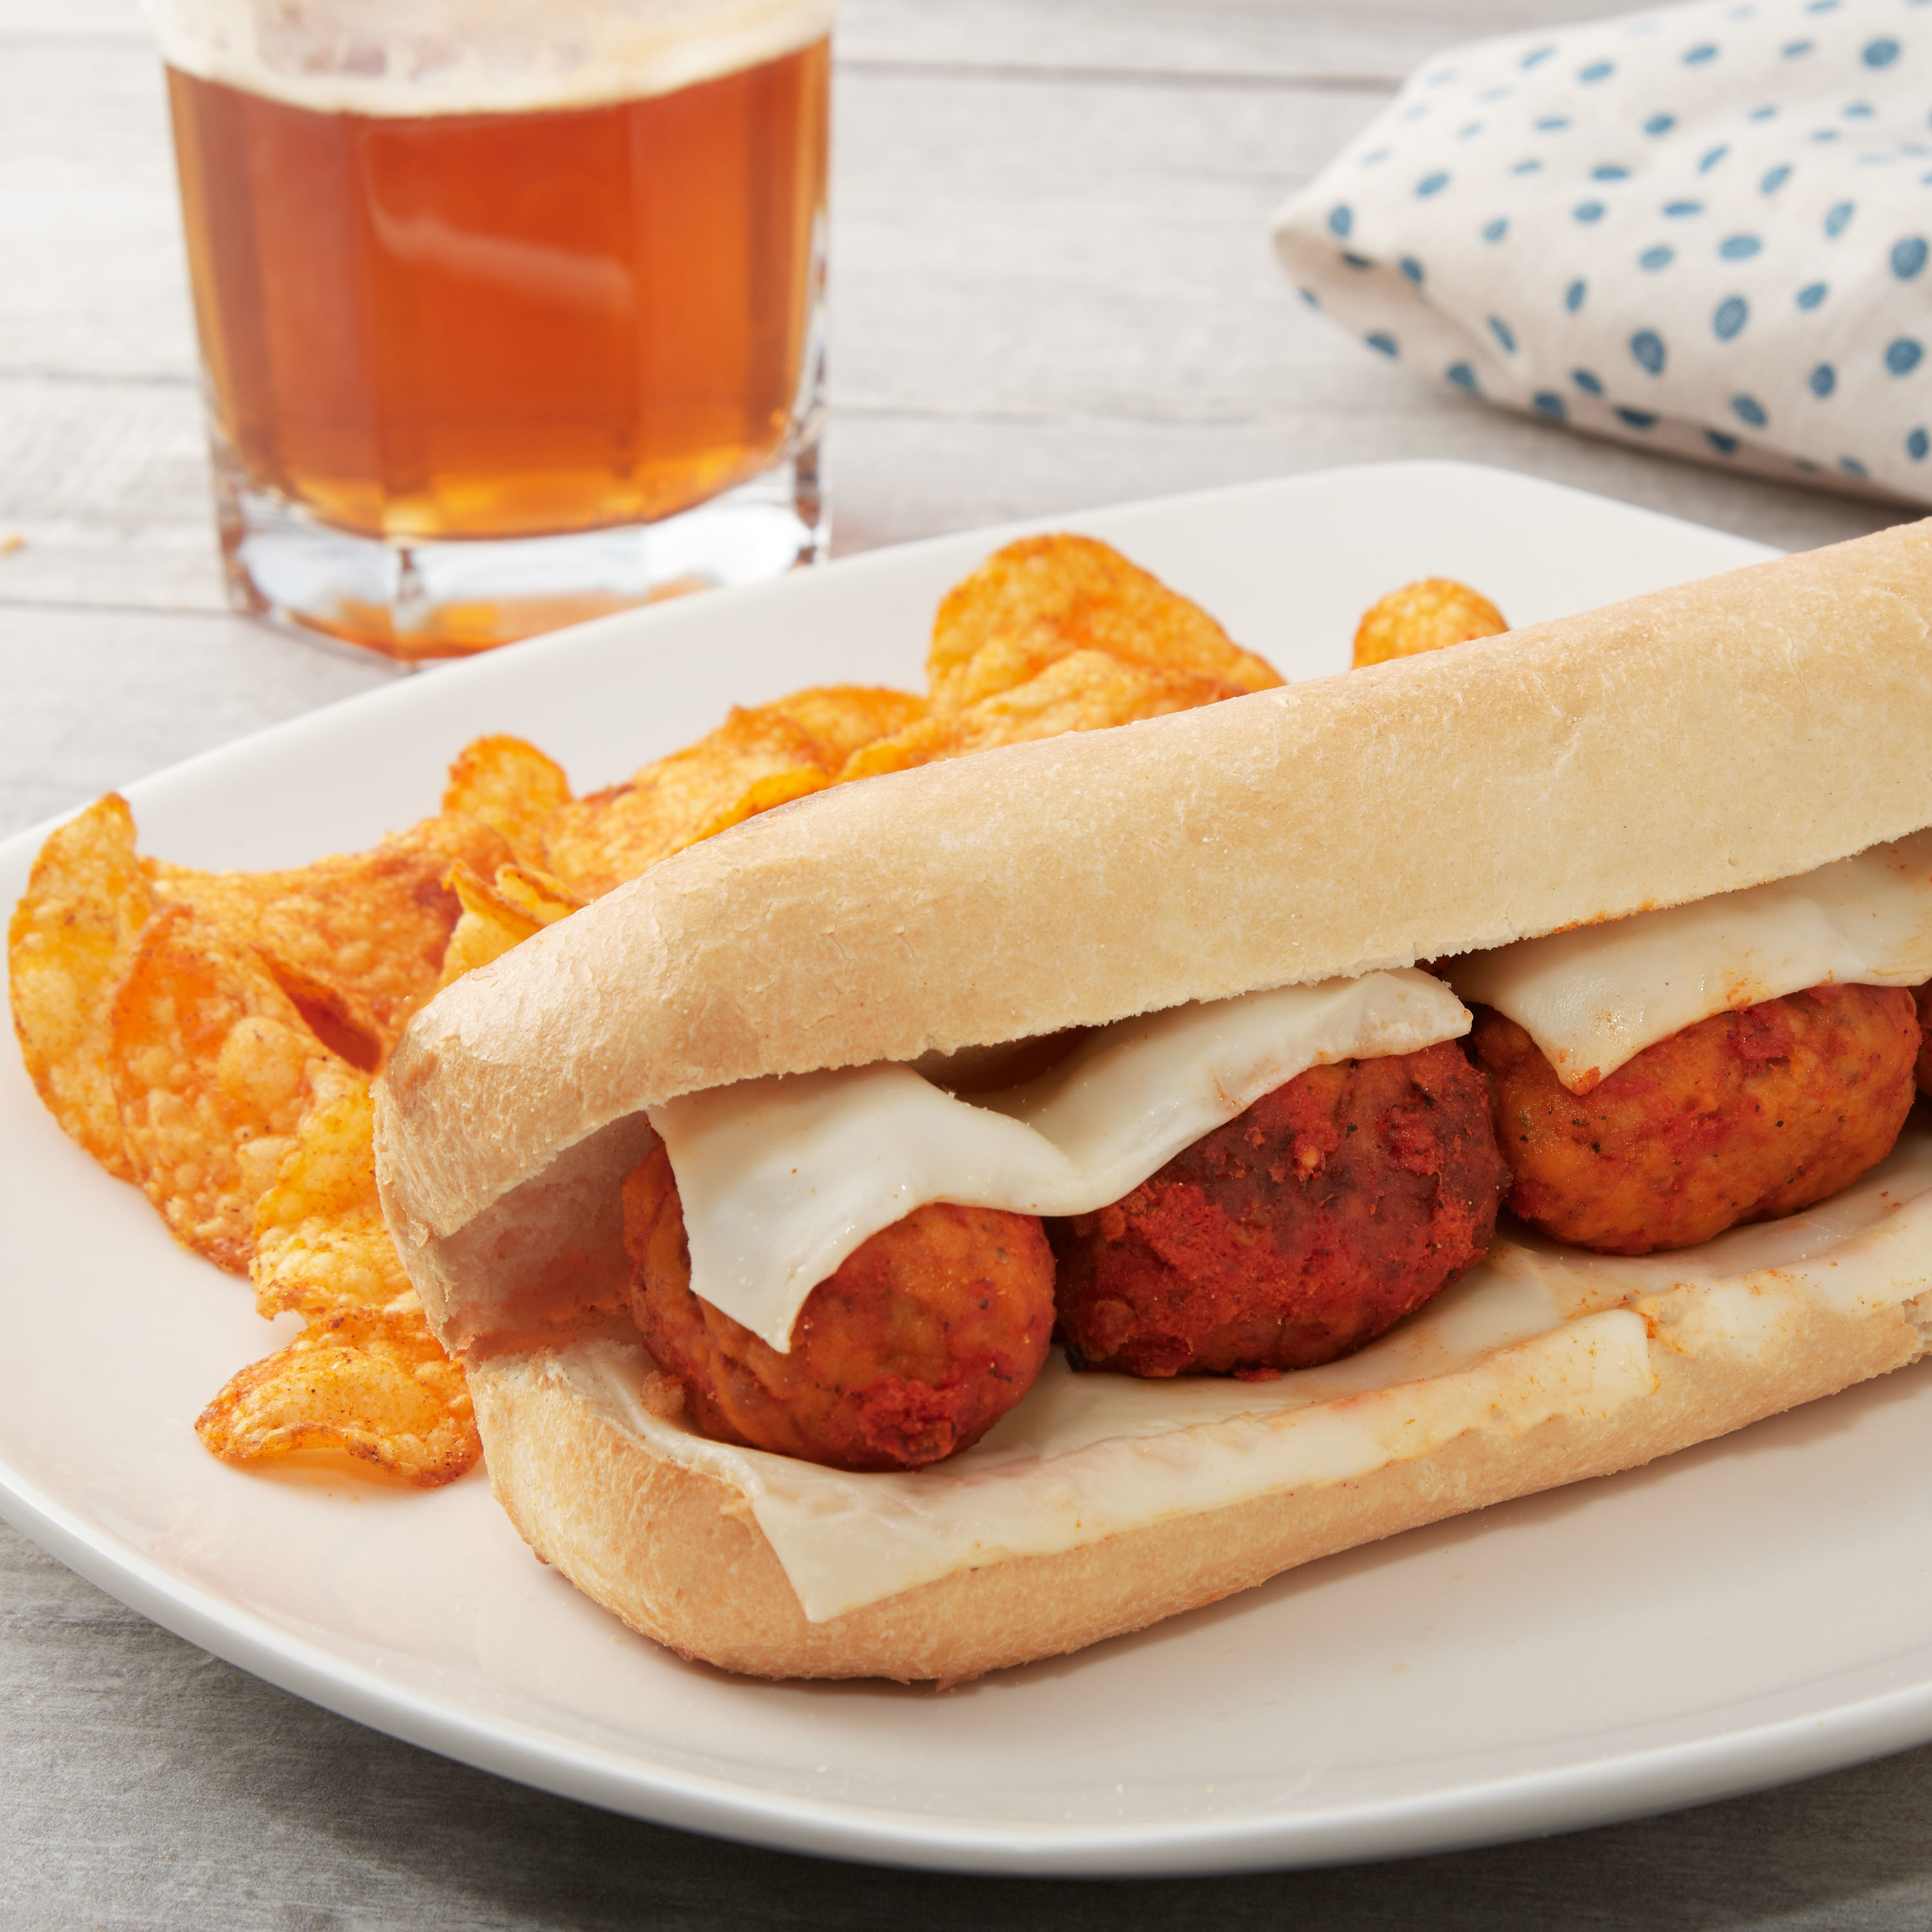 The meatball sandwich with cheese on a plate